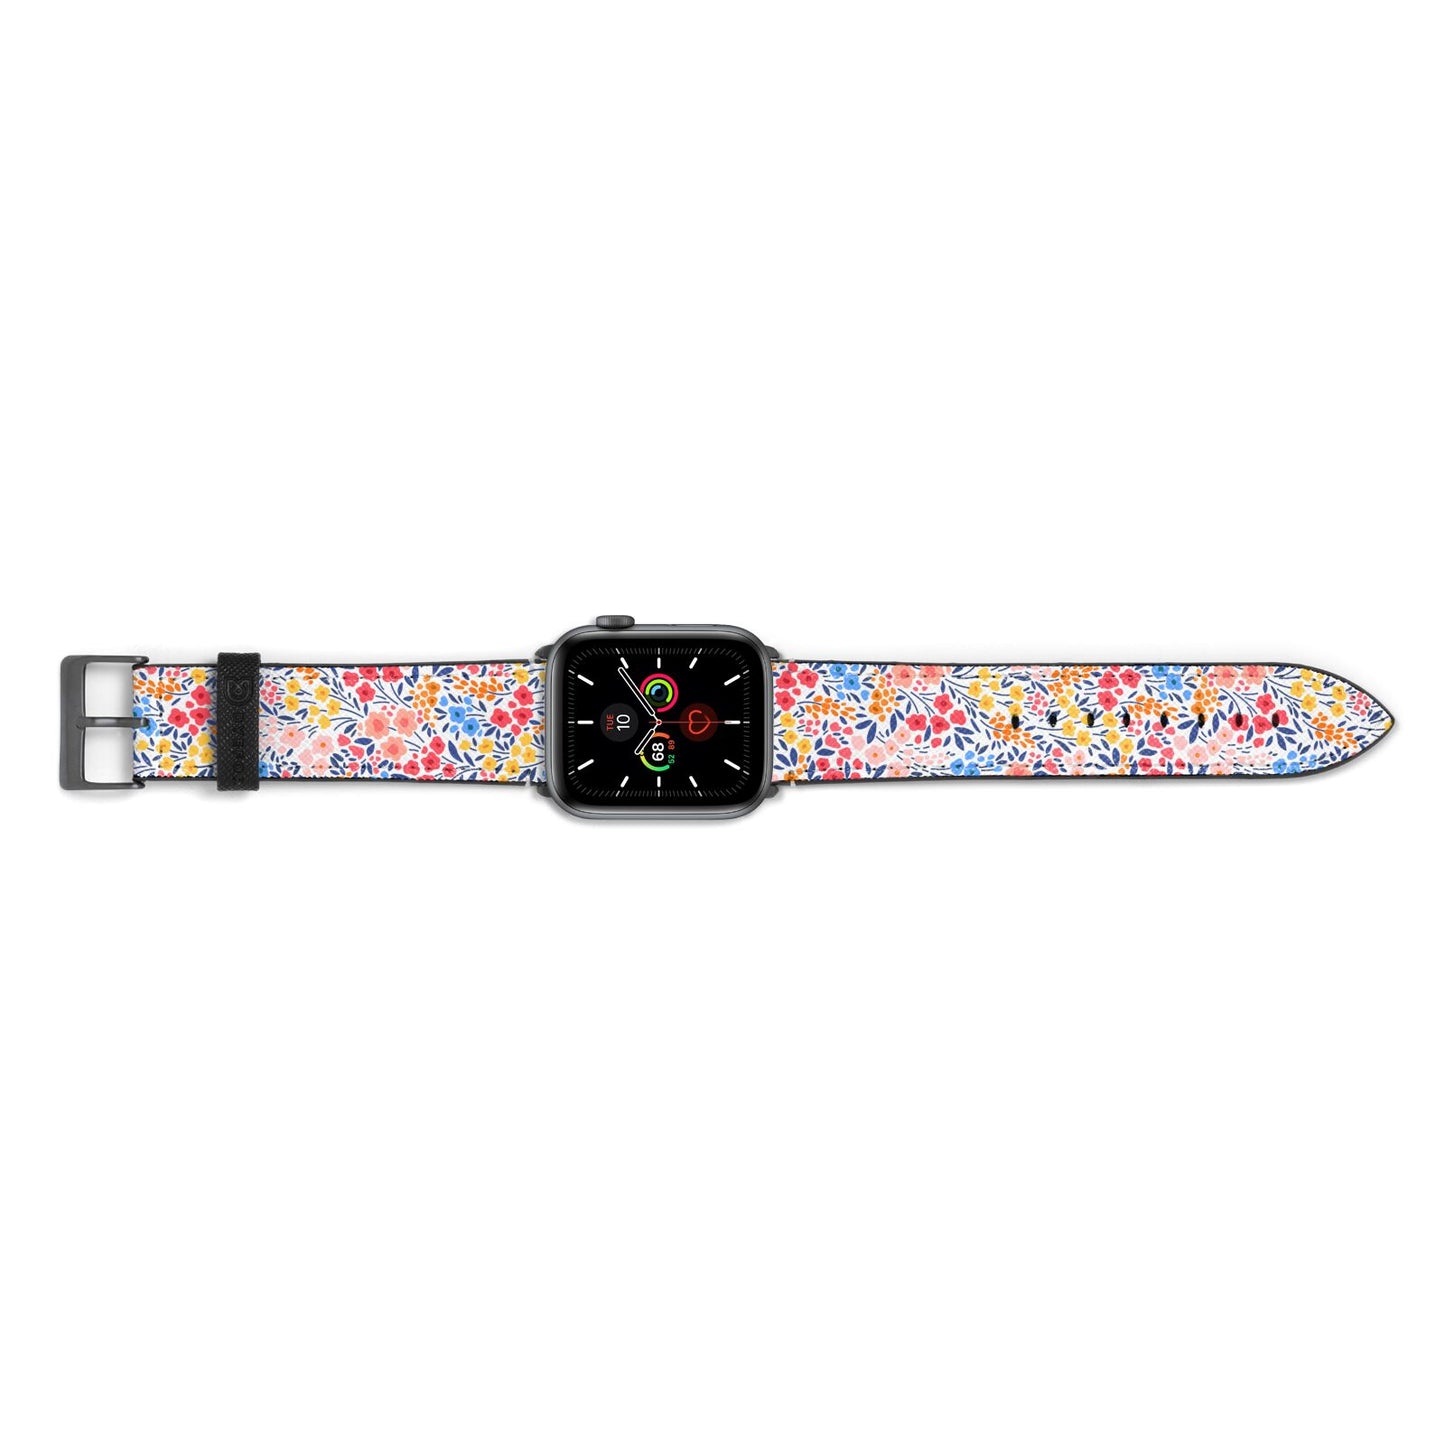 Small Flowers Apple Watch Strap Landscape Image Space Grey Hardware